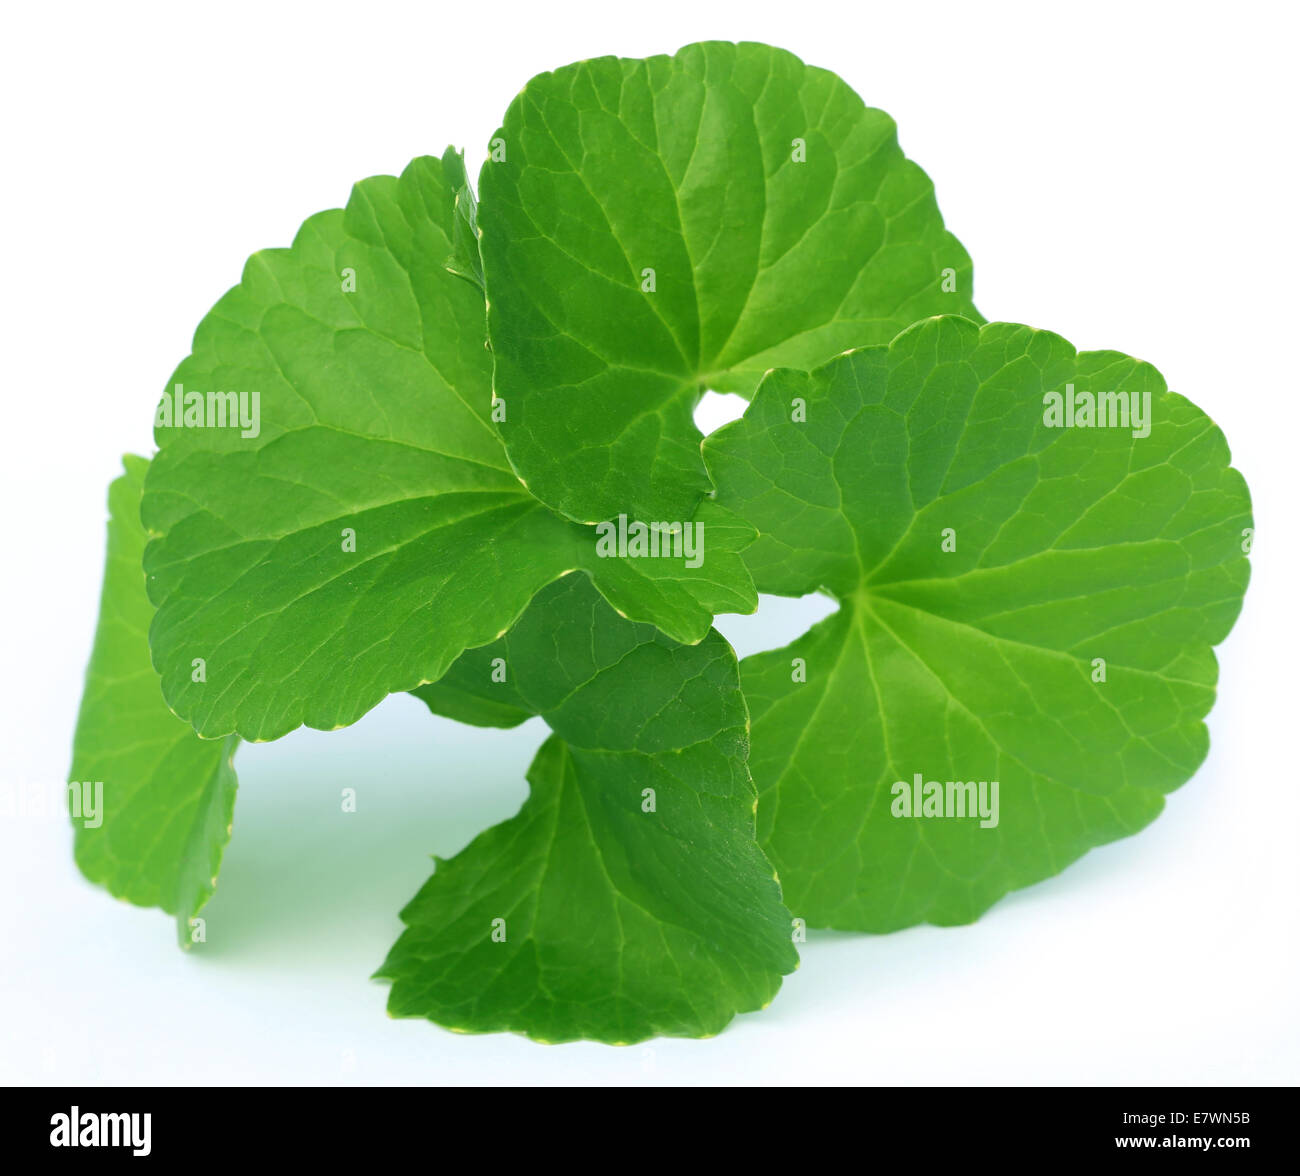 Medicinal thankuni leaves of Indian subcontinent over white background Stock Photo